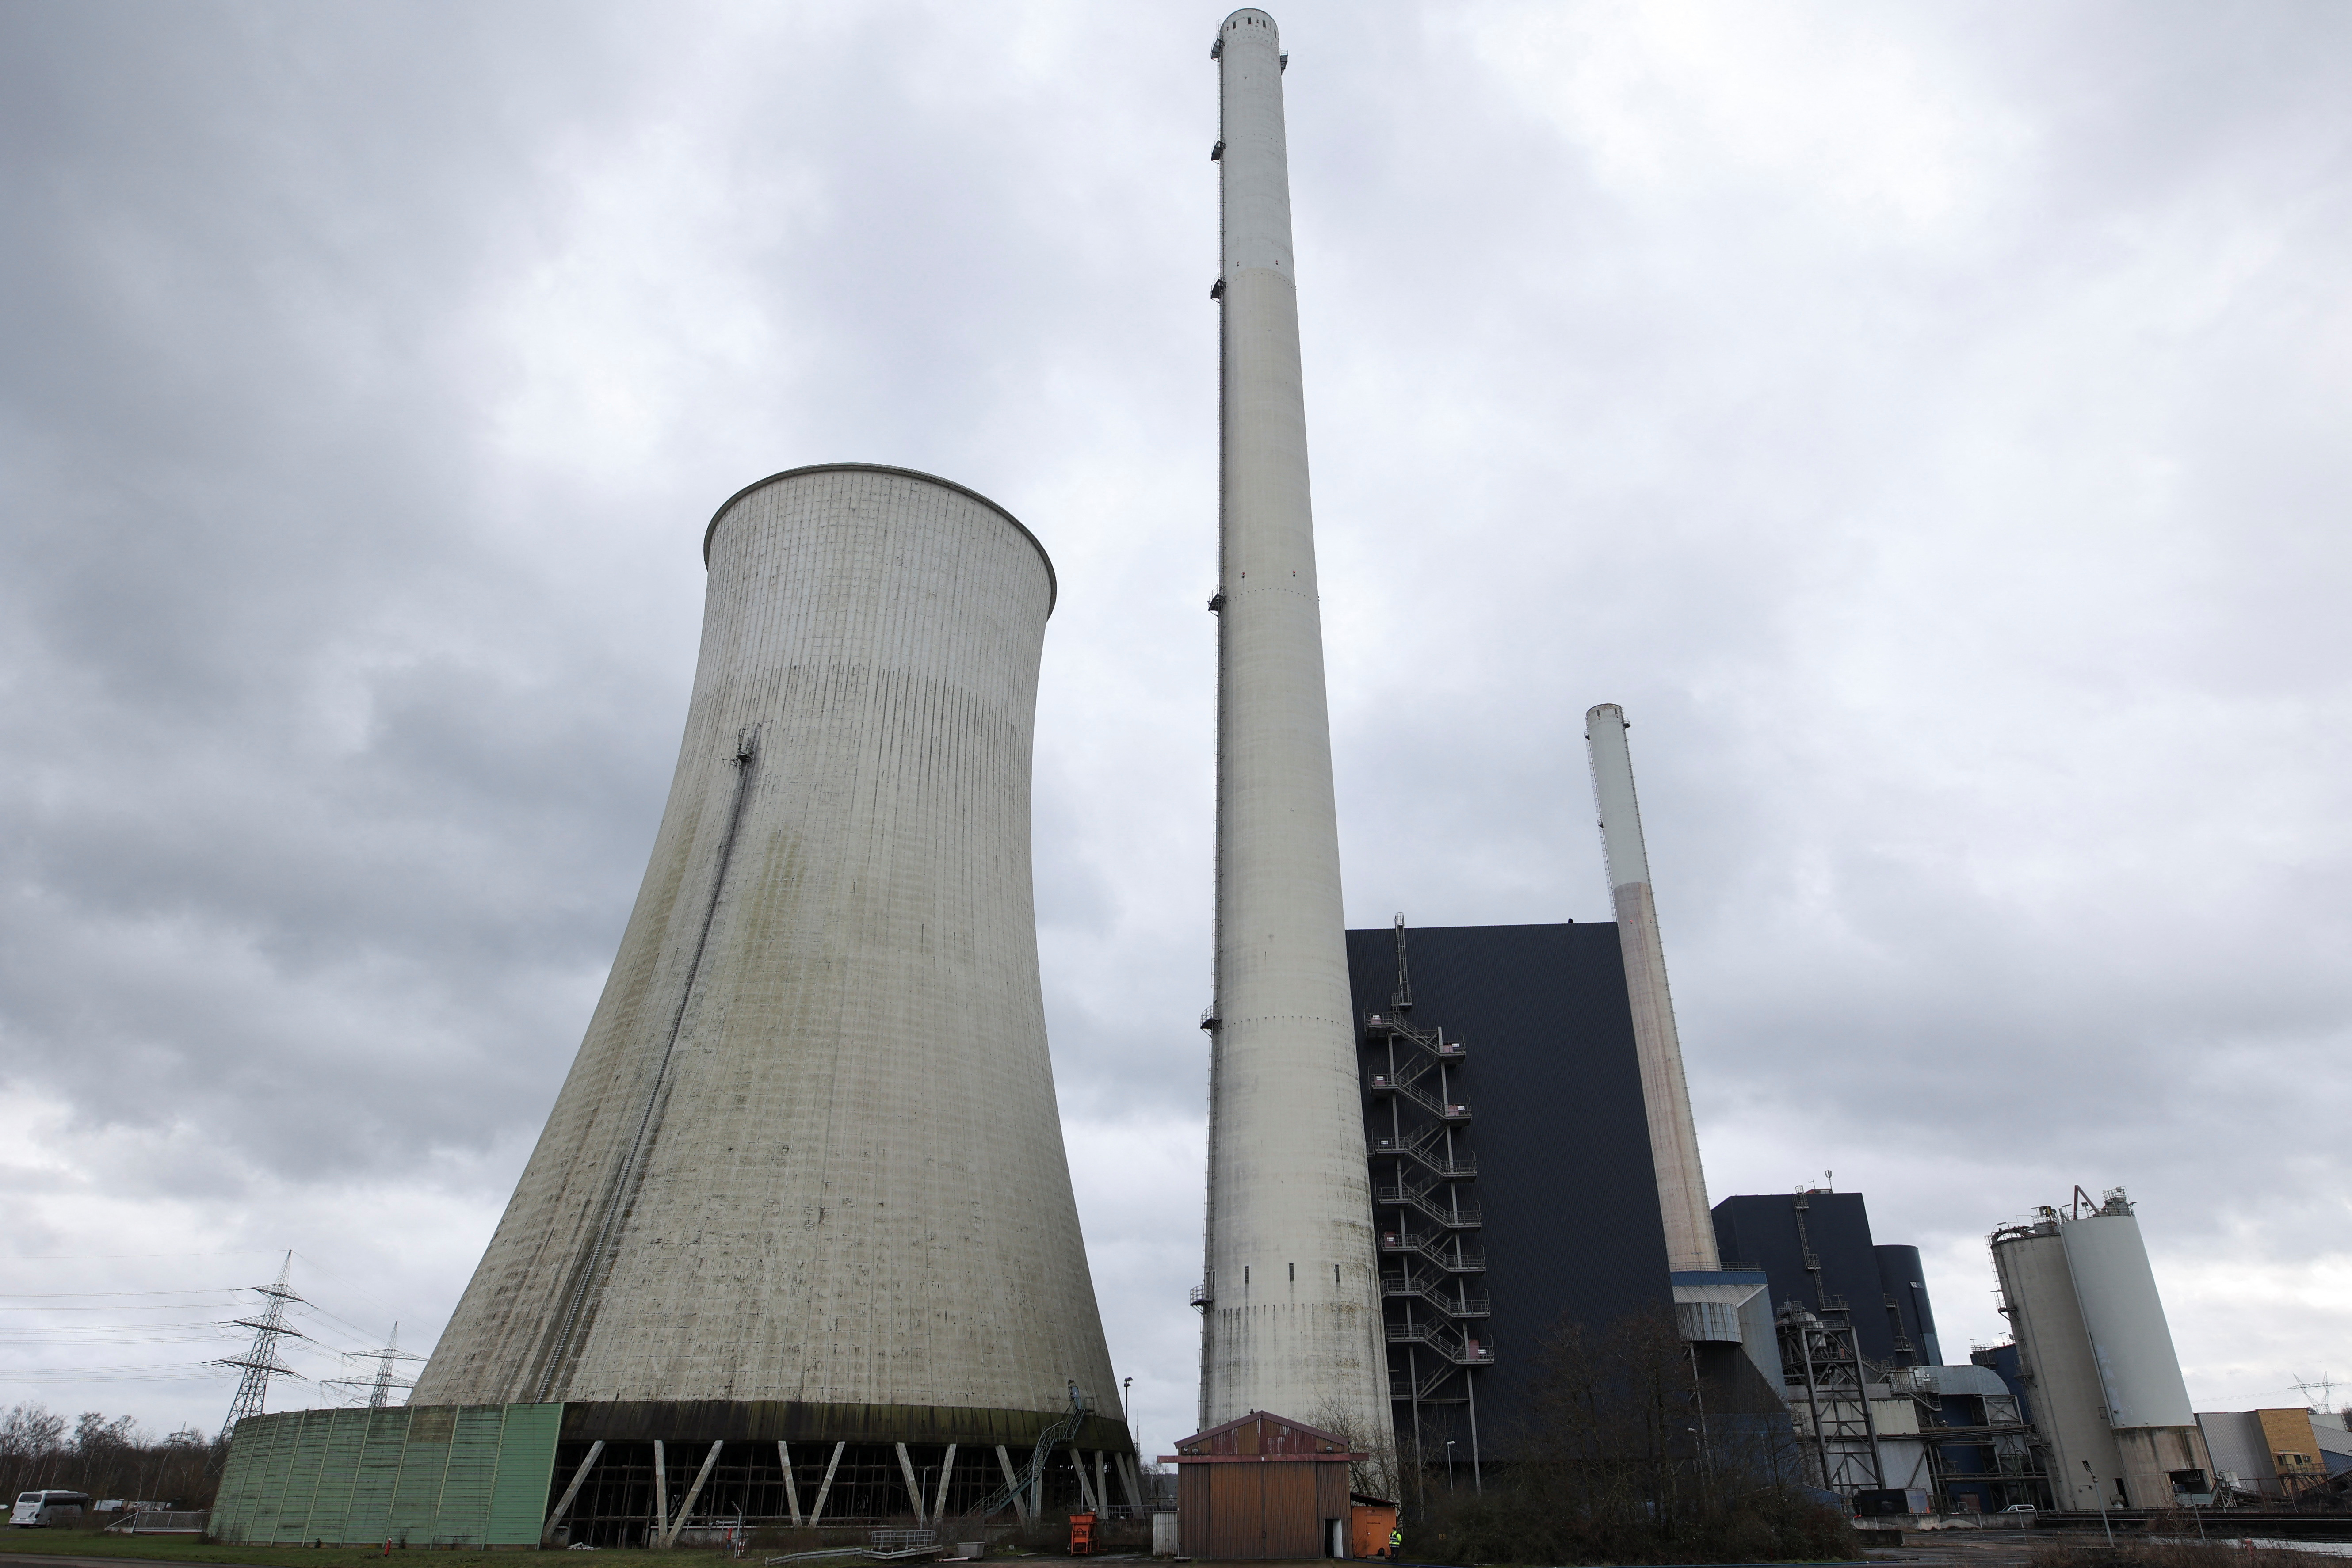 Event on future of decomissioned coal-fired power plant in Ensdorf